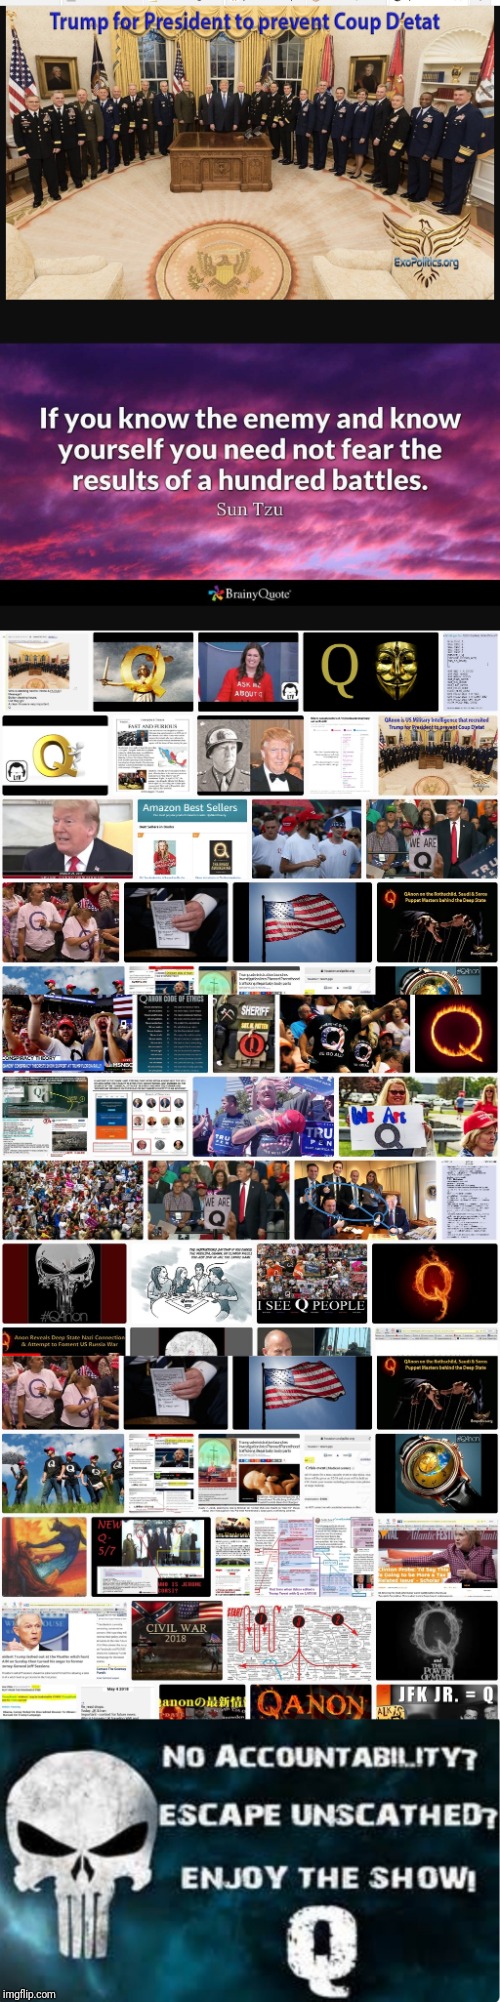 Qanon. The Storm Is Here. | image tagged in qanon,deepstate,clinton corruption,justice,president trump | made w/ Imgflip meme maker